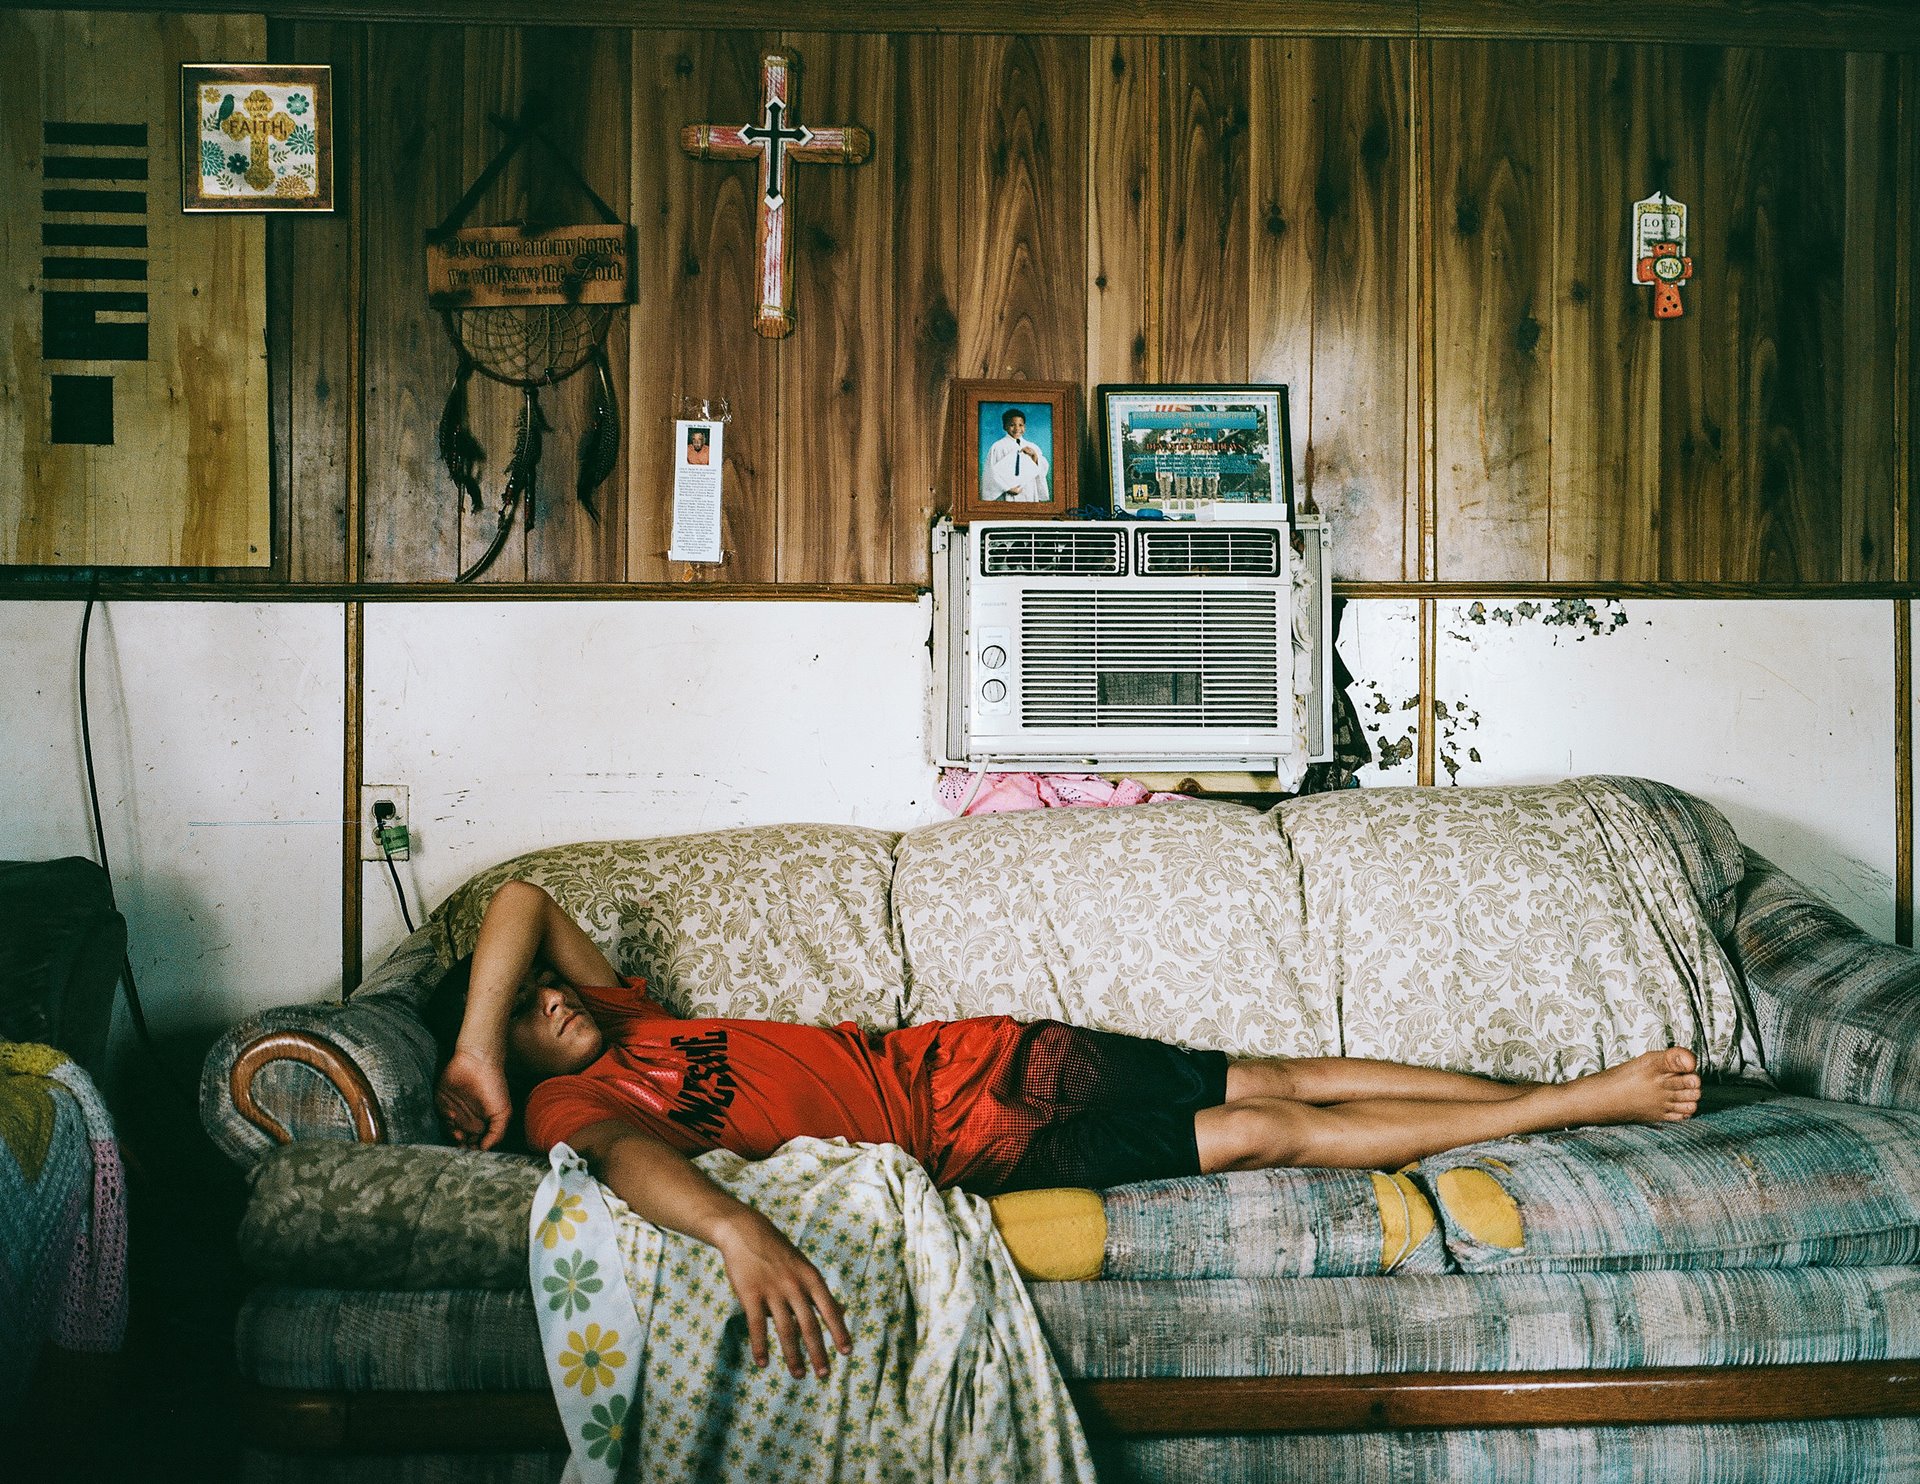 Isaac Dardar in his family home on Isle de Jean-Charles, in southeastern Louisiana, United States. For two centuries, the Biloxi-Chitimacha-Choctaw tribe, a community of French-speaking Native Americans, lived on the island.&nbsp;